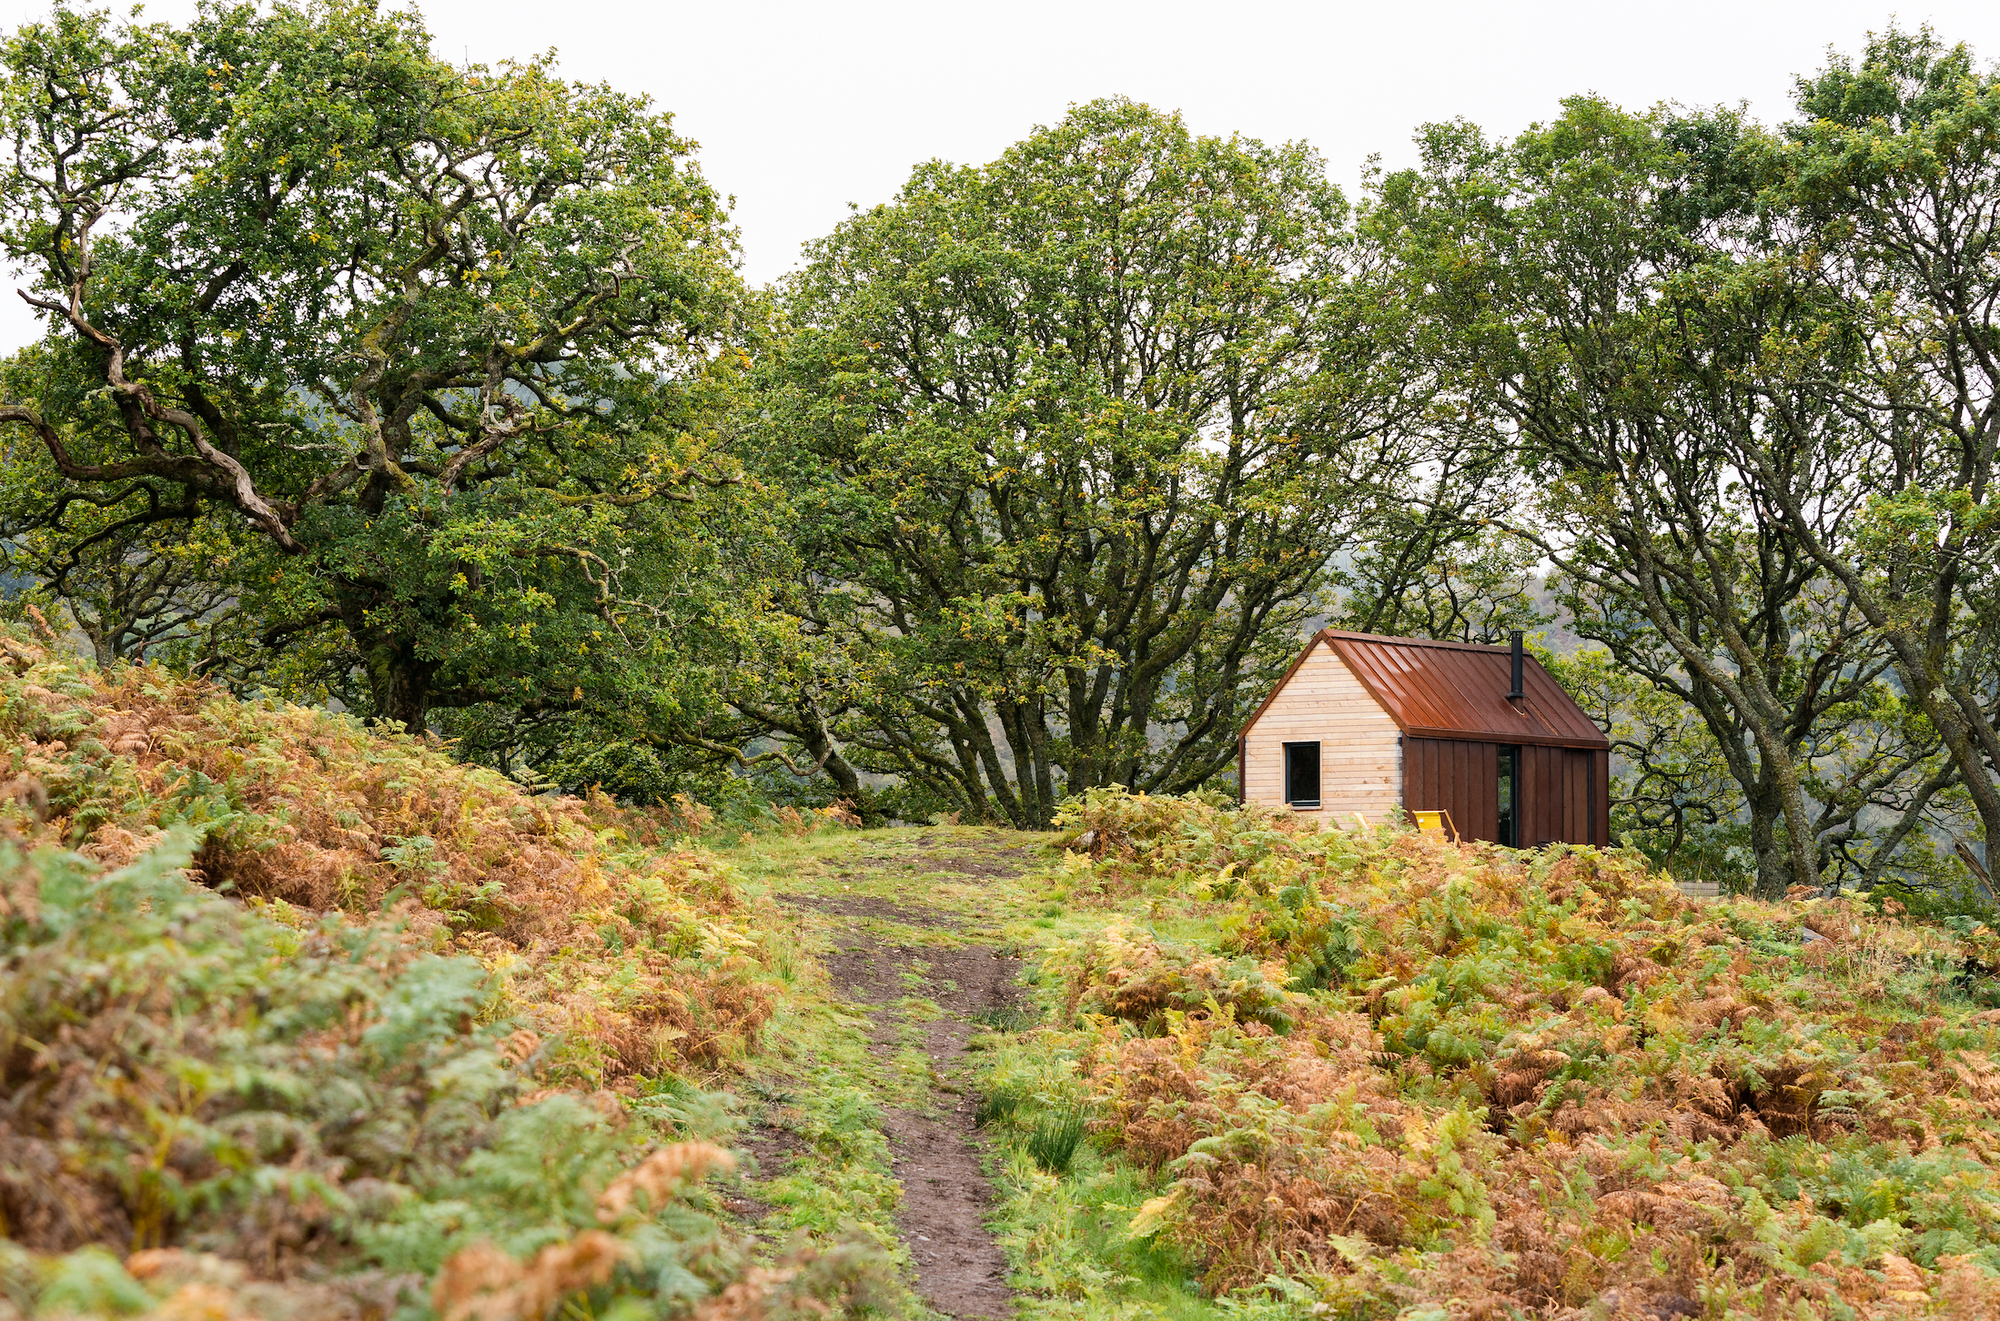 Products - The Home Bothy